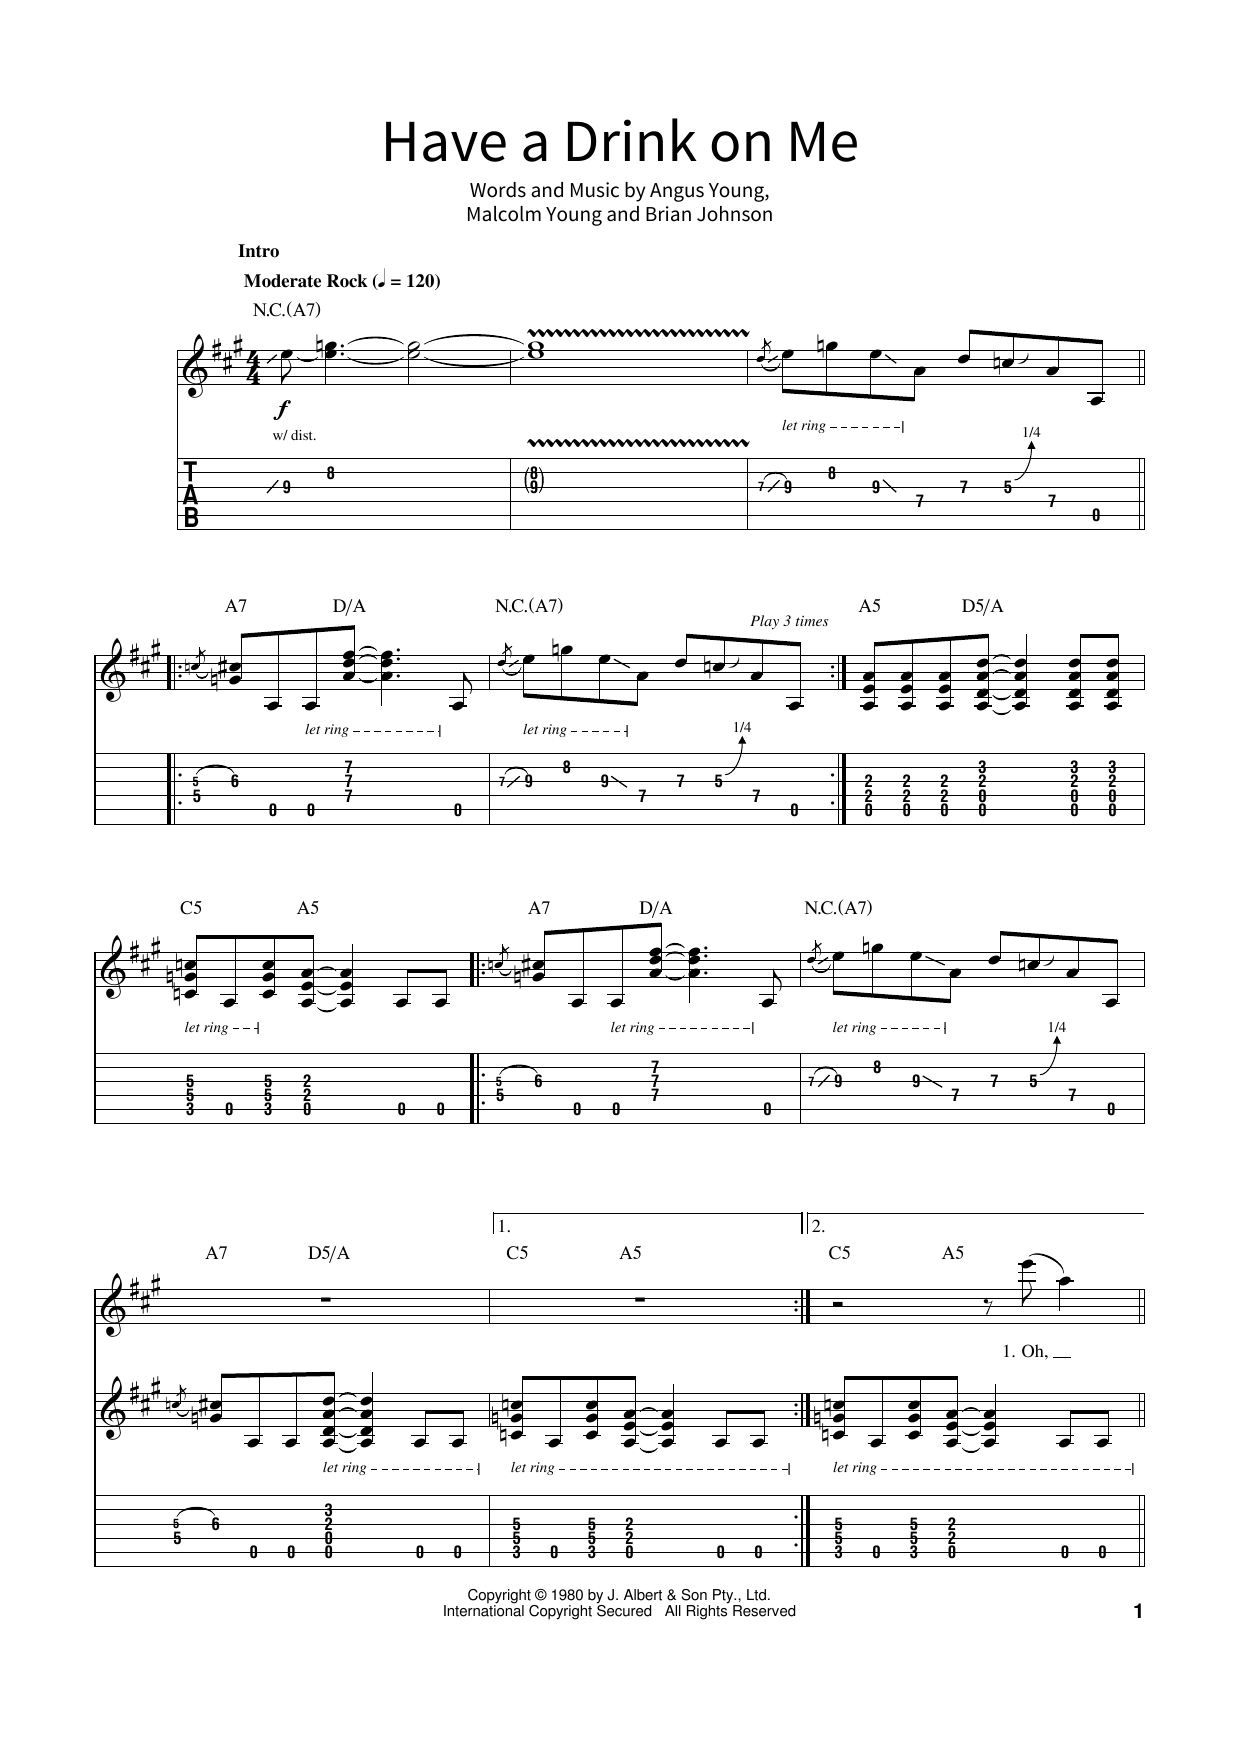 AC/DC Have A Drink On Me sheet music notes and chords. Download Printable PDF.